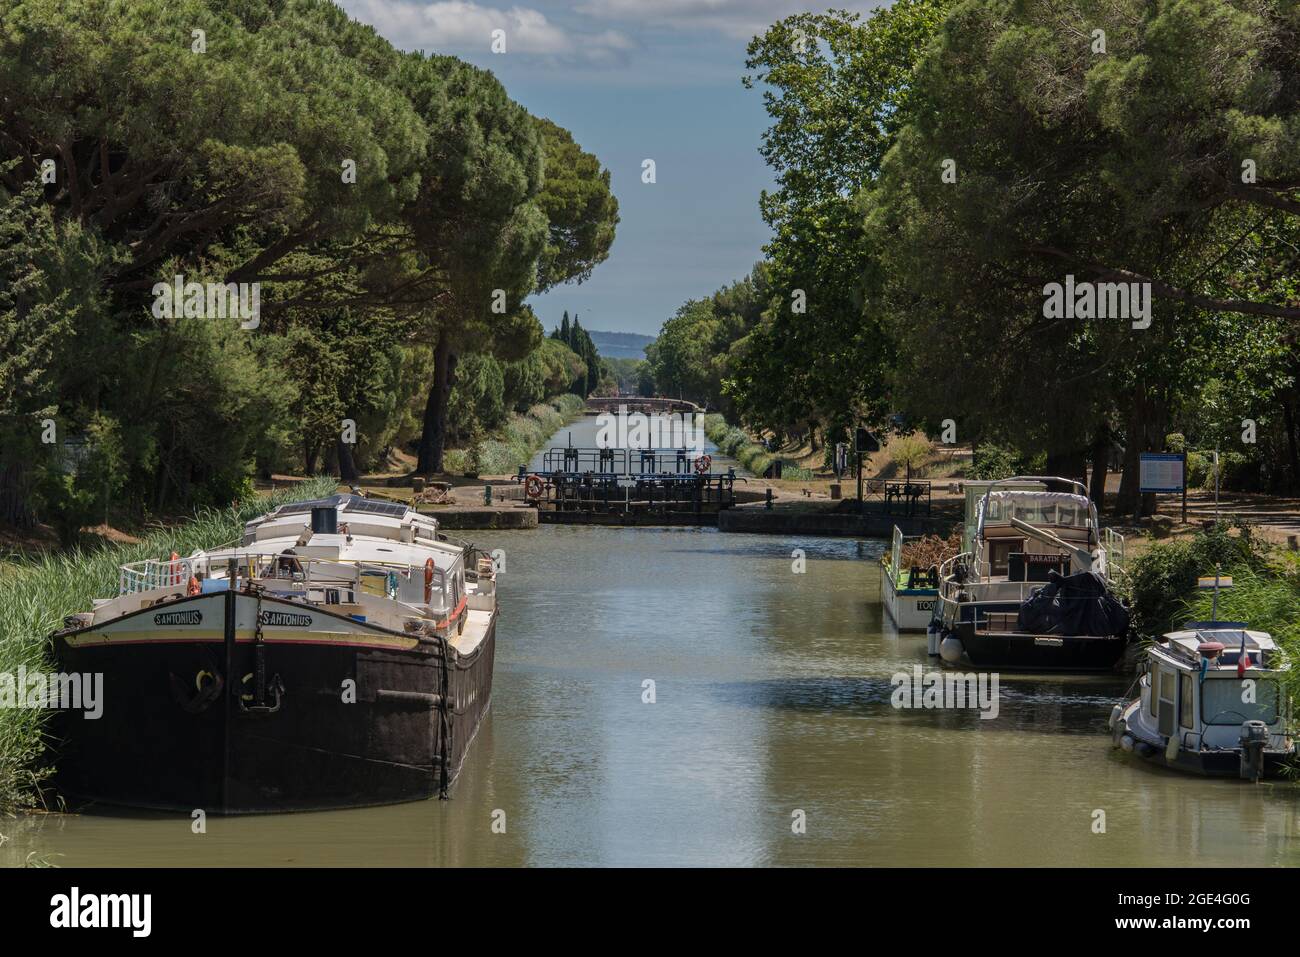 Boats on the Canal de Jonction into the direction of Salleles d'Aude Stock Photo